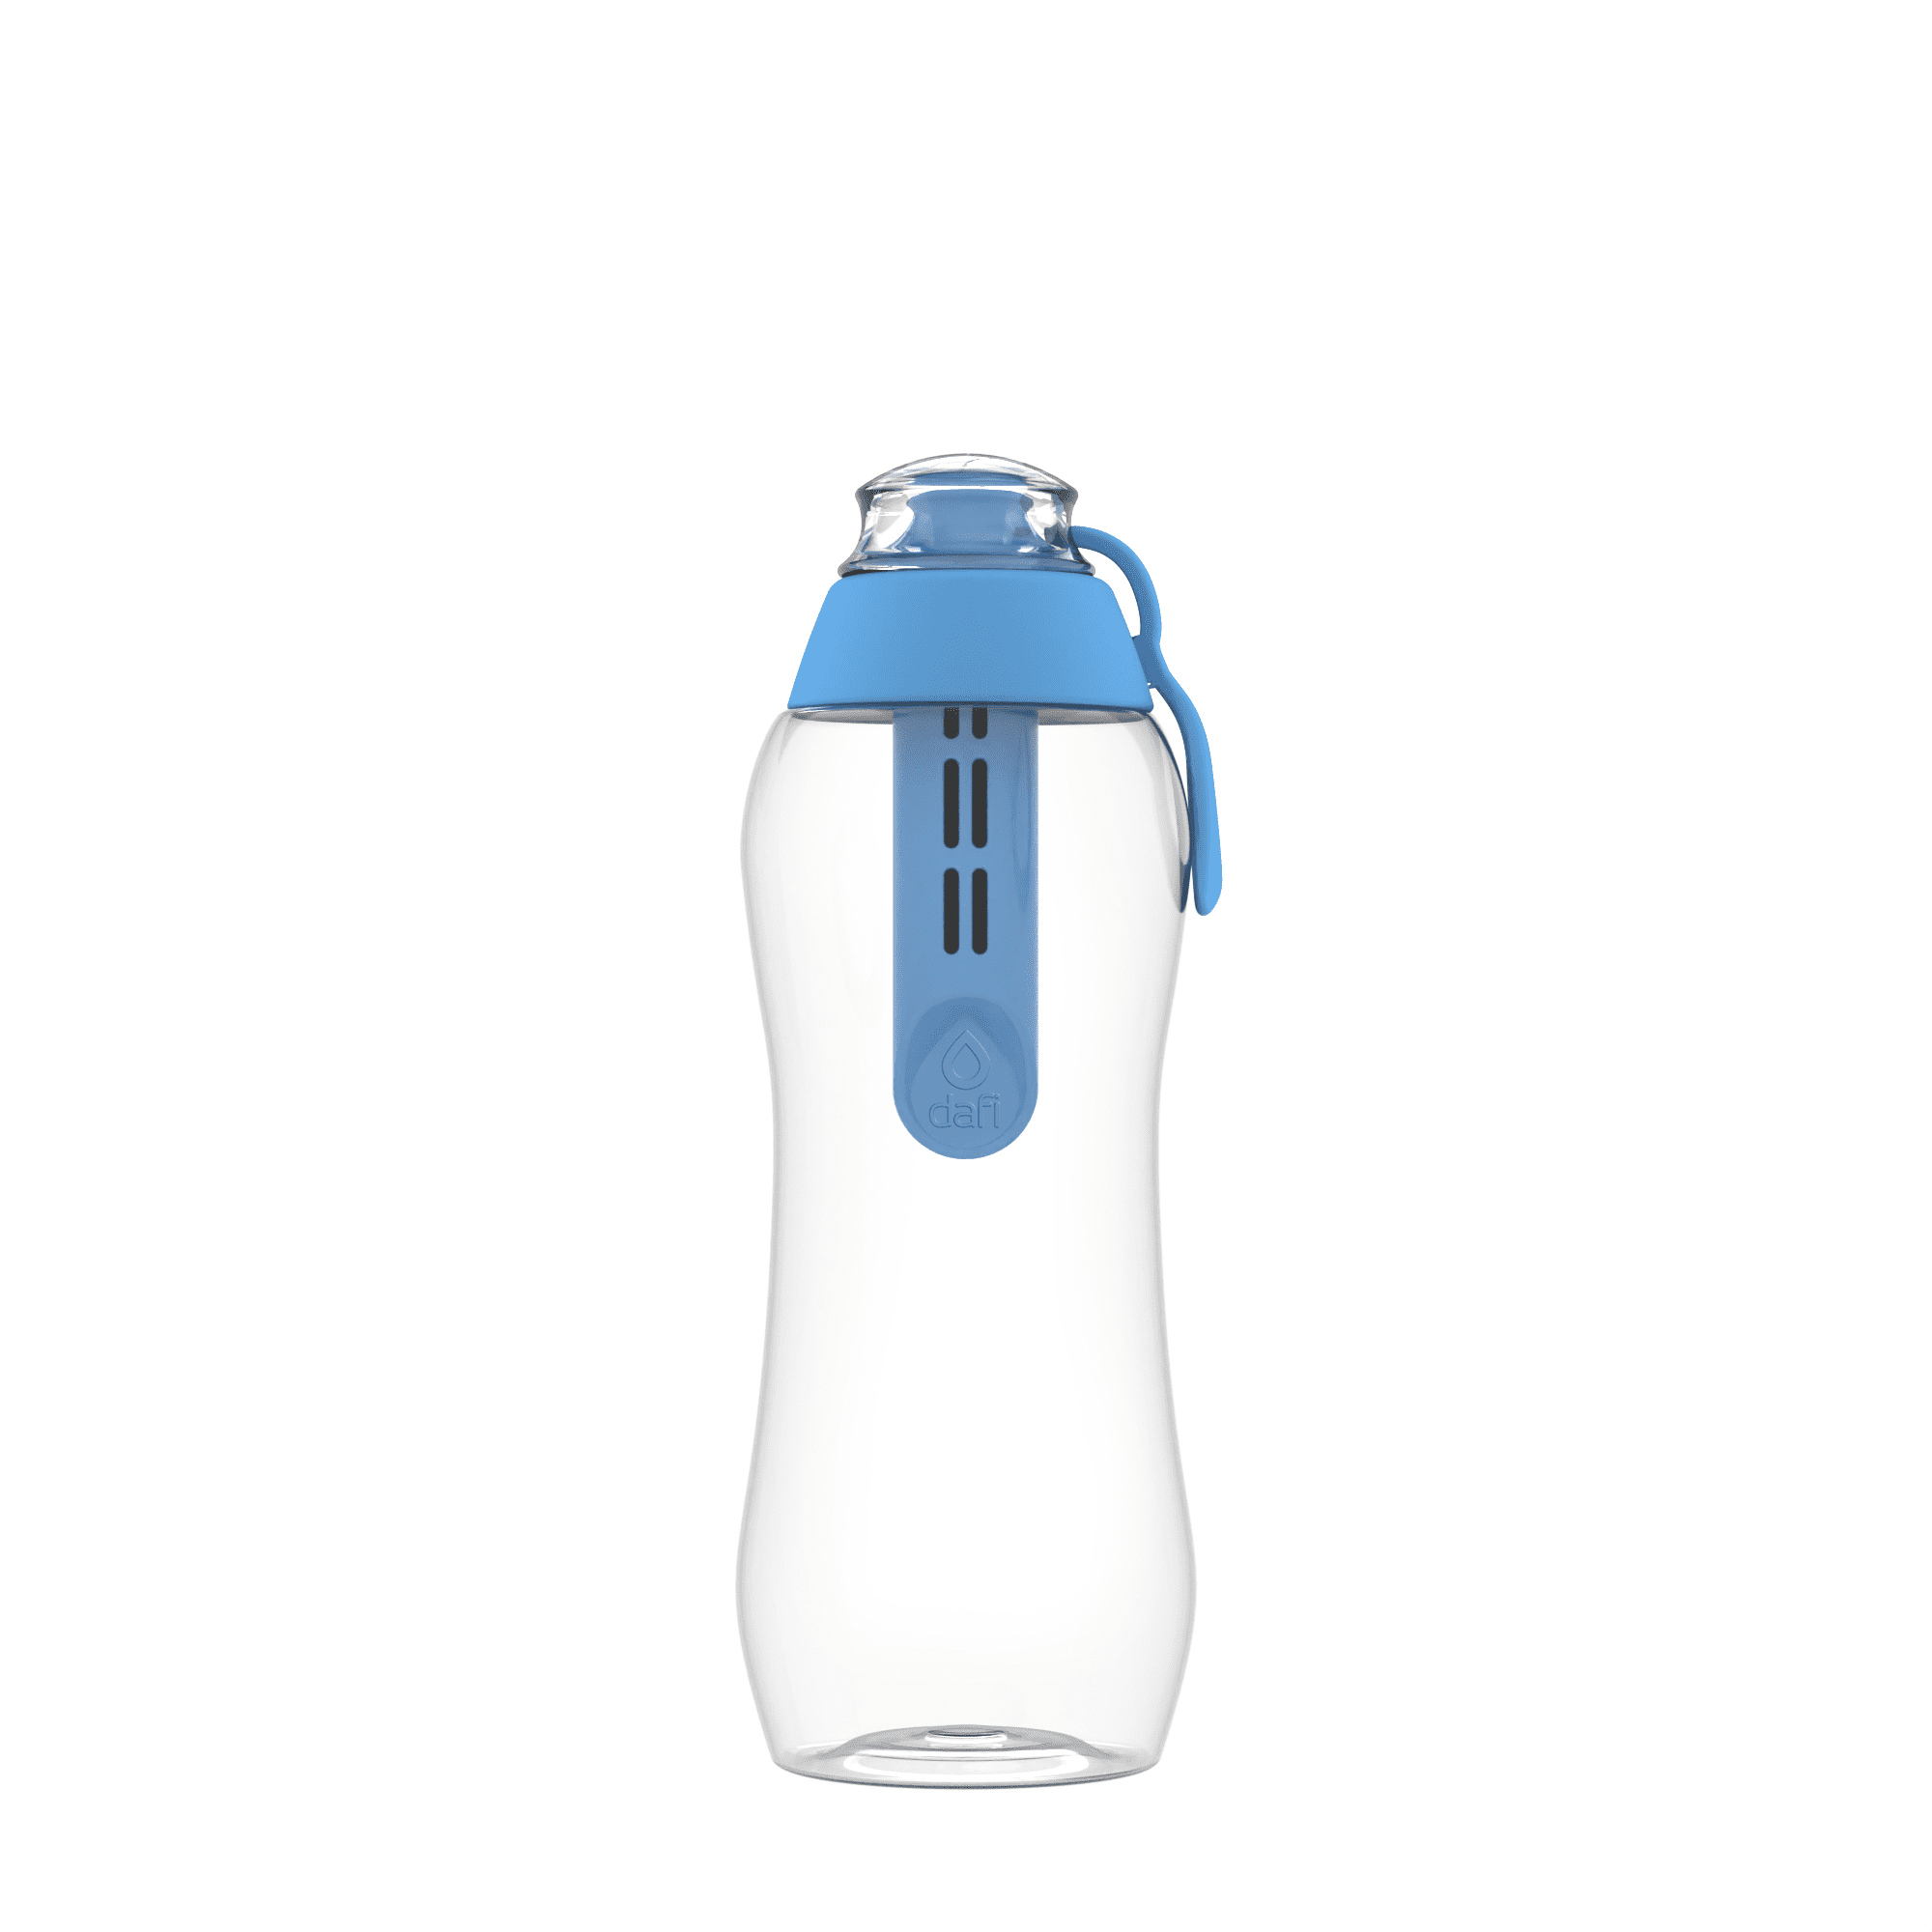 Cirkull 22oz Plastic Water Bottle with Blue Lid and 5 Flavor Cartridges  Variety Delicious (Fruit Pun…See more Cirkull 22oz Plastic Water Bottle  with